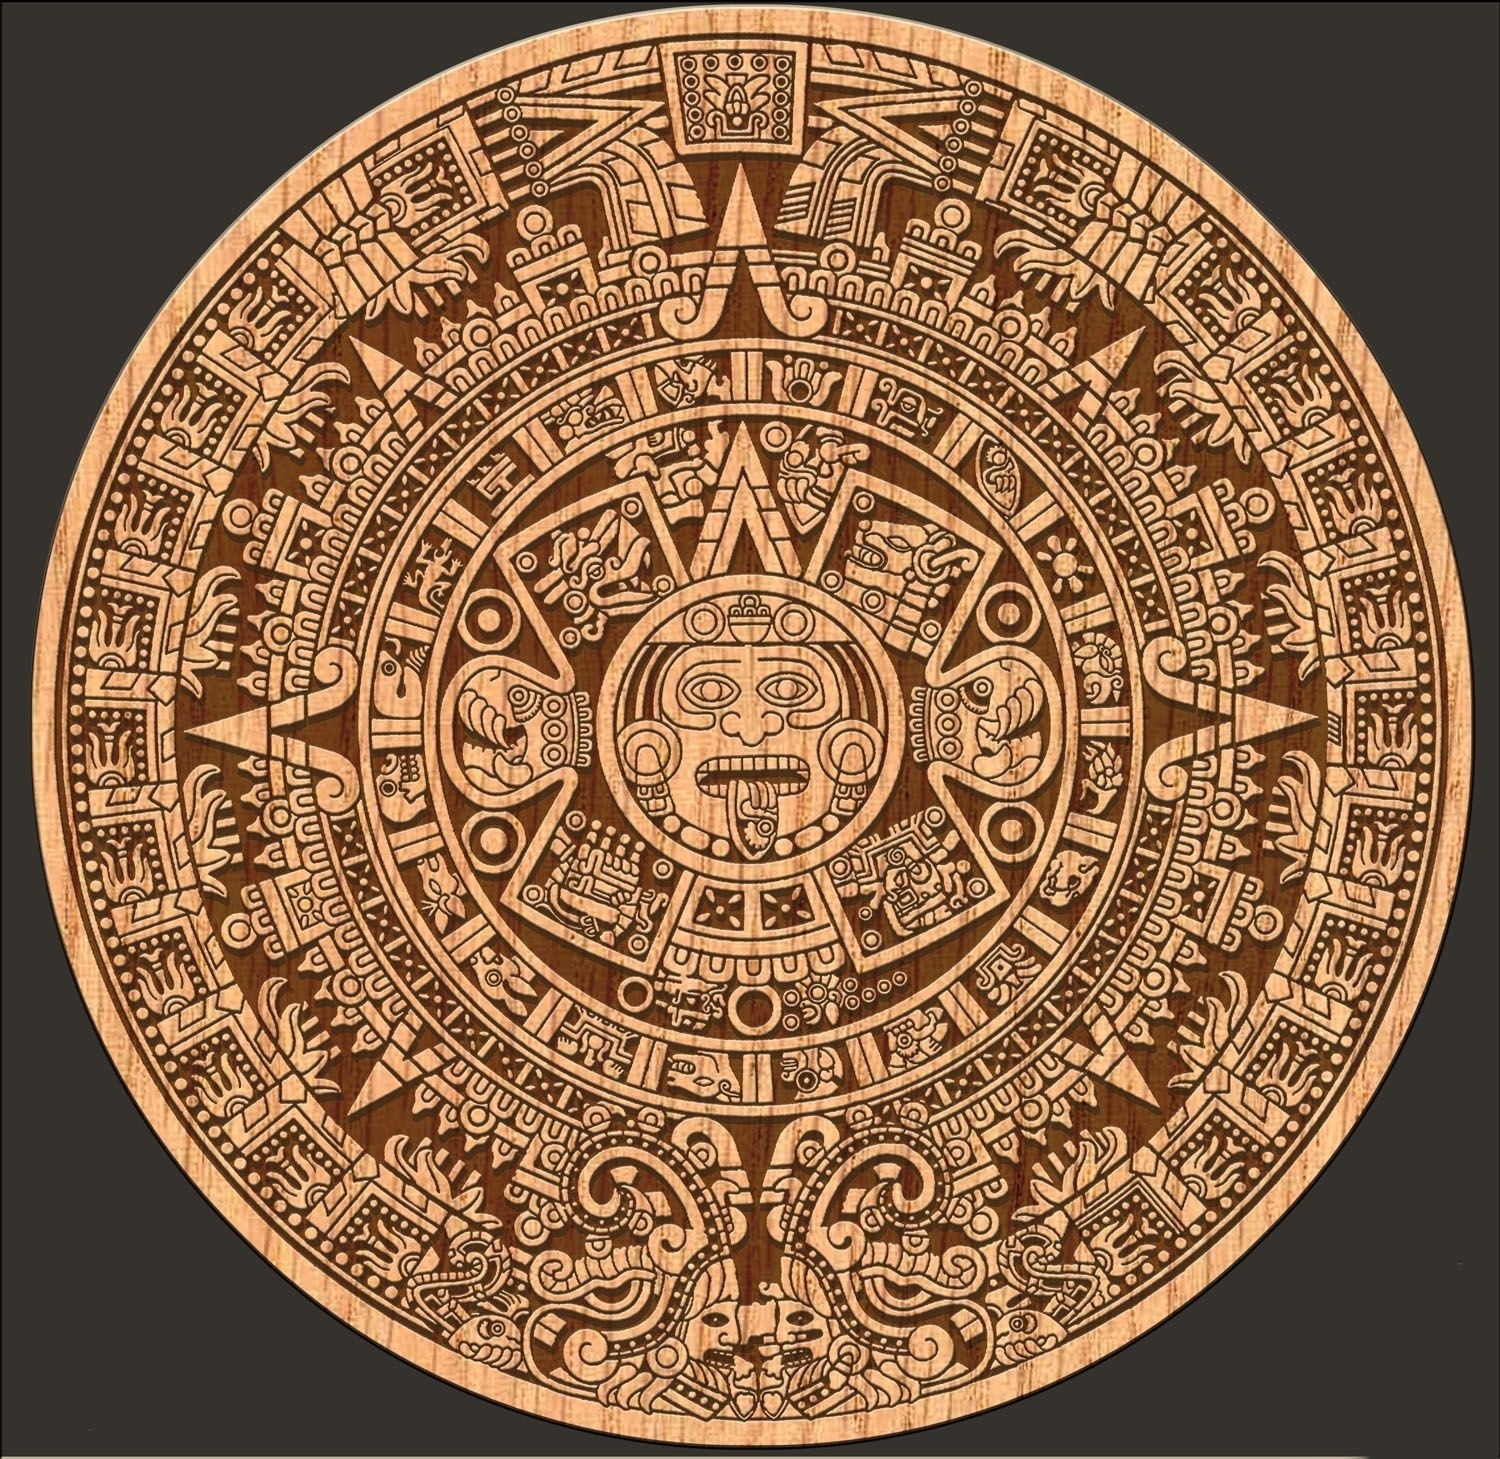 Meaning Of Shapes On Aztec Calendar | Template Calendar Printable for Meaning Of Shapes On Aztec Calendar